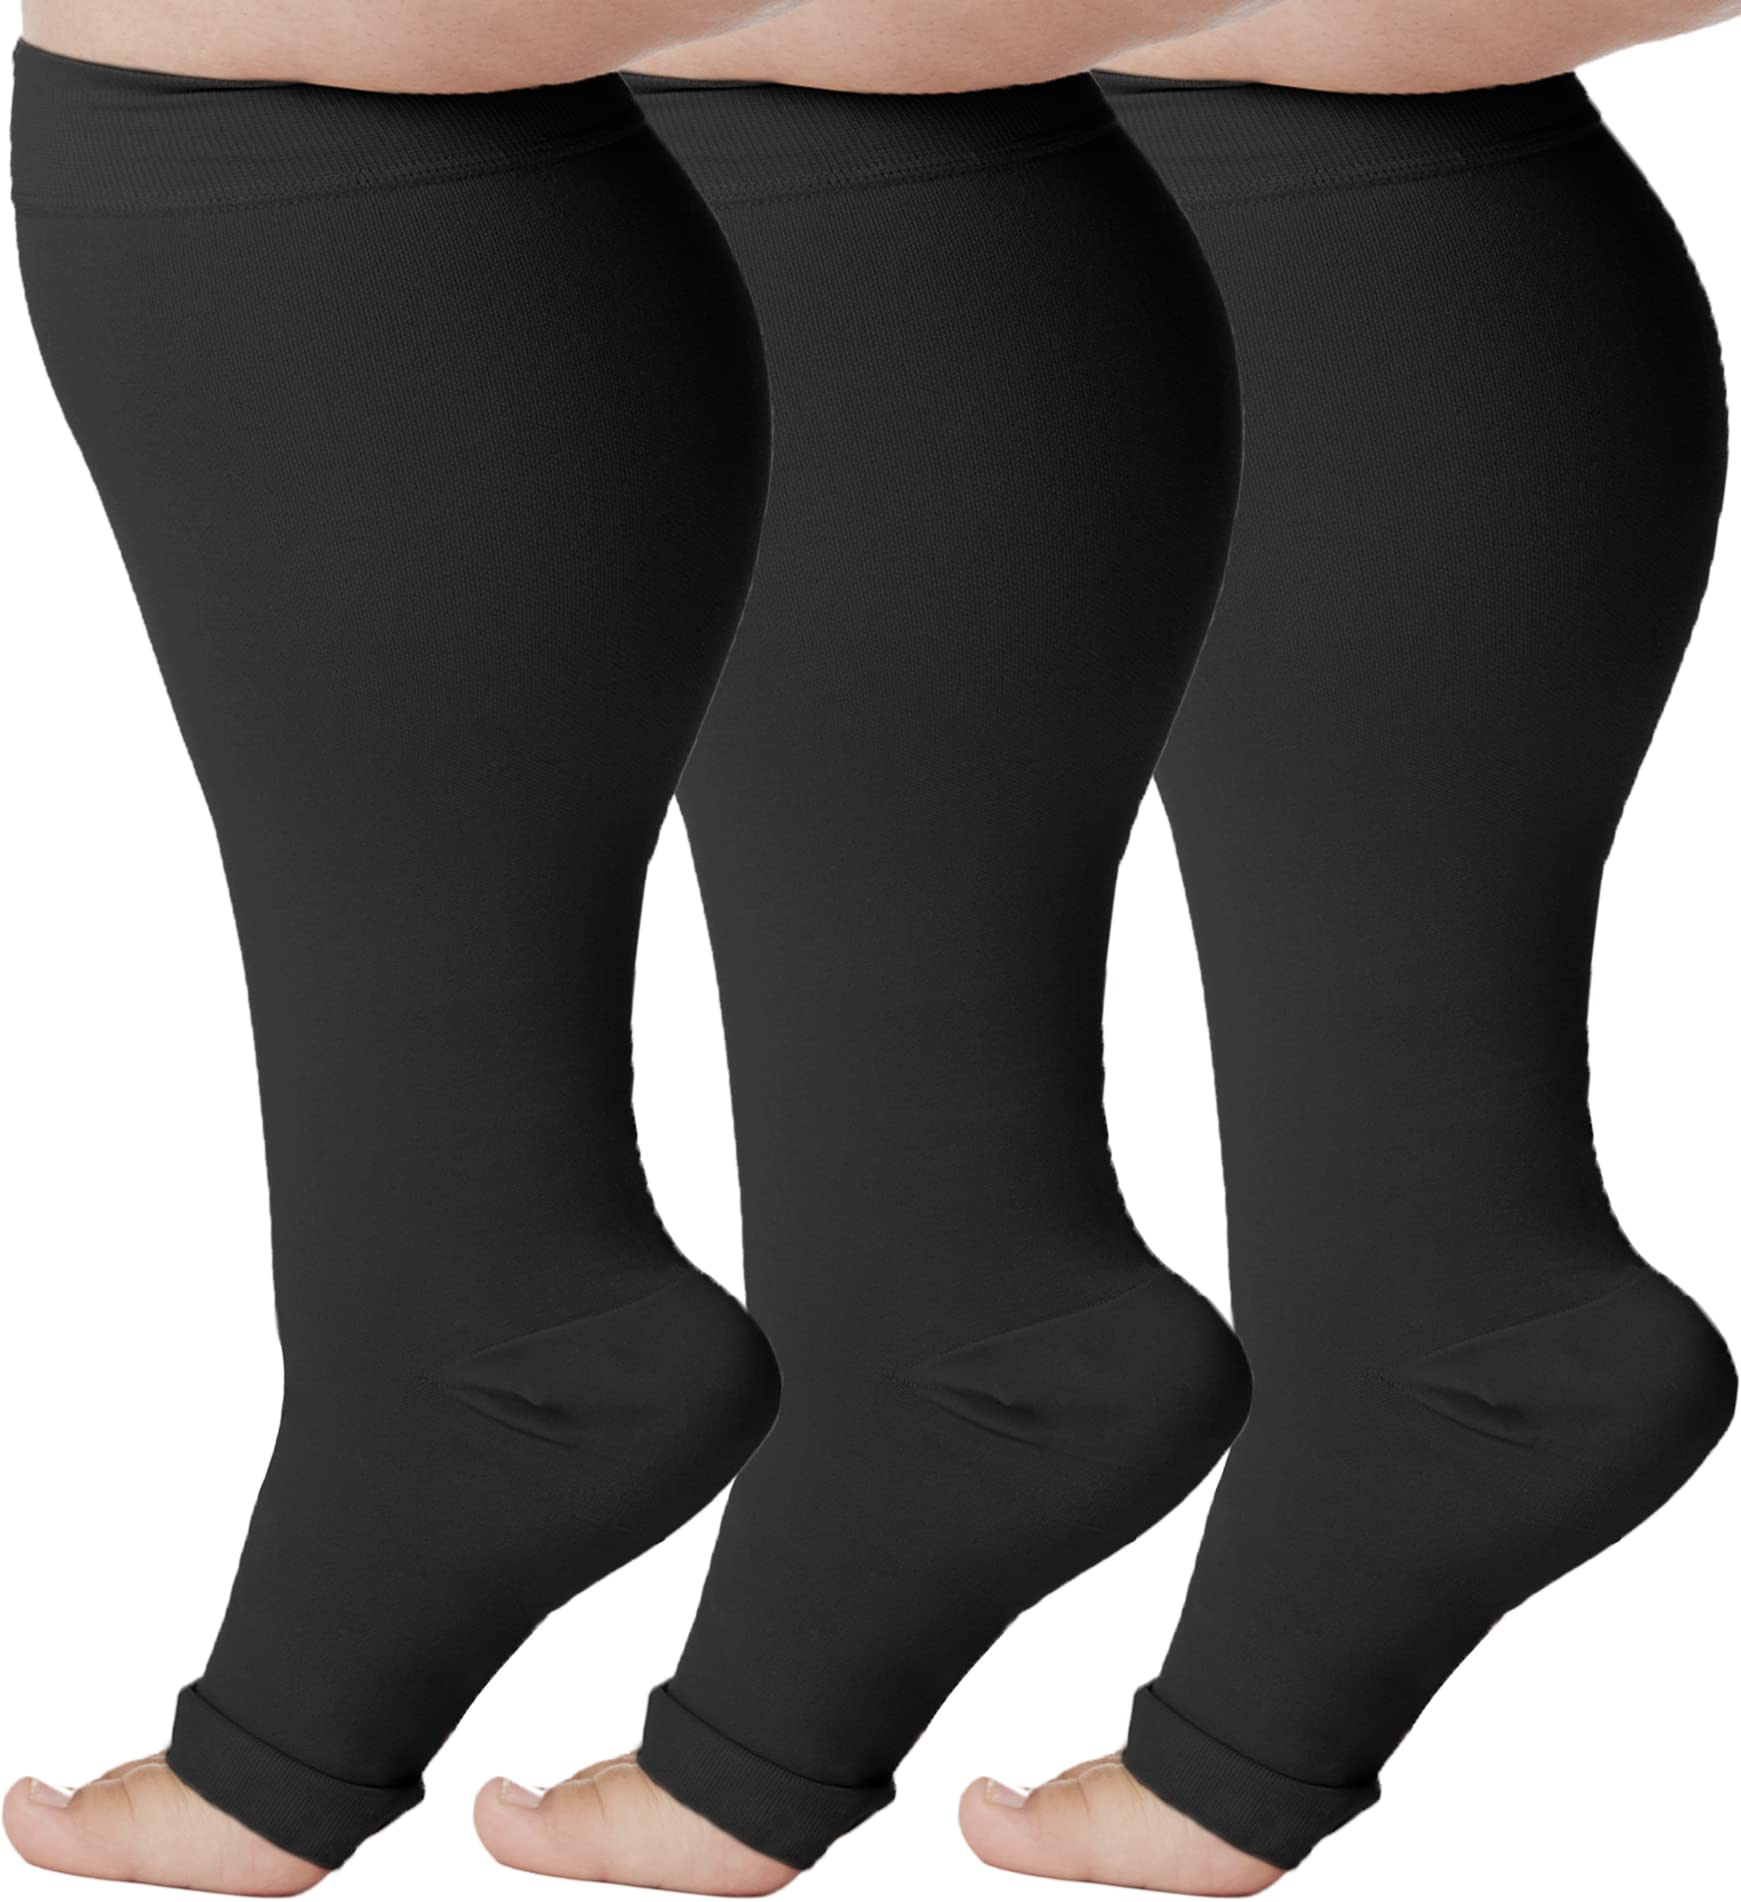 3 Pack) 7XL Big and Tall Compression Socks 20-30 mmHg Extra Large Wide Calf  - Plus Size Compression Support Hose Men & Women Bariatric Fatigue Pain Leg  Swelling by Absolute Support 